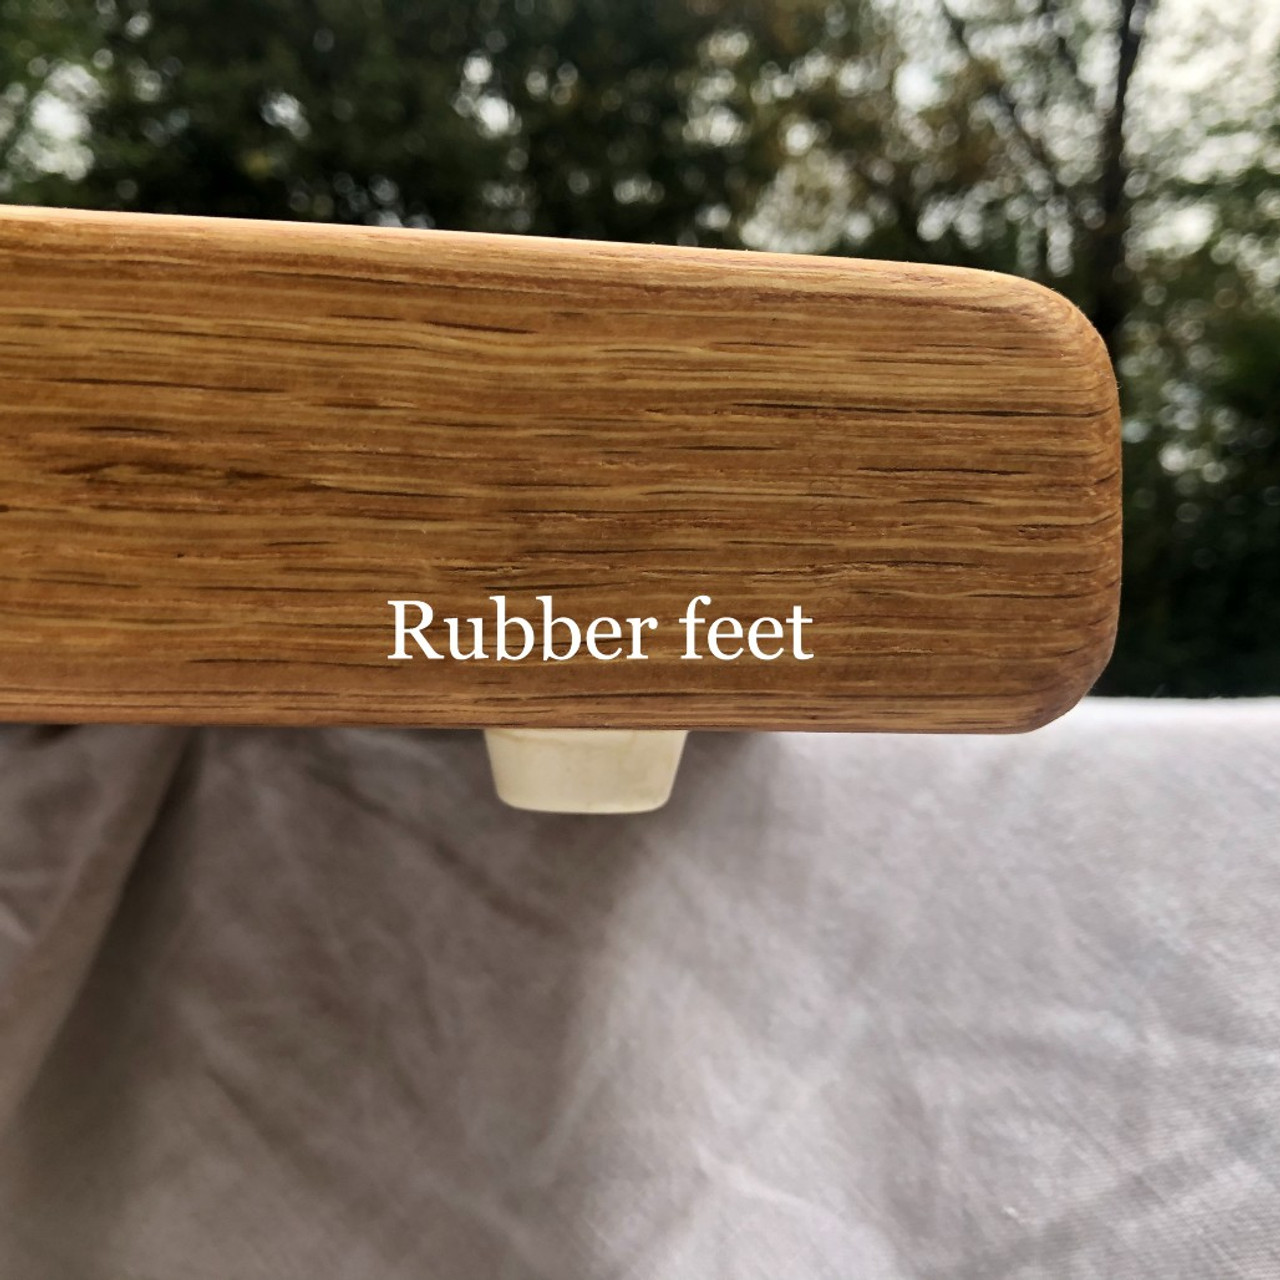 https://cdn11.bigcommerce.com/s-1vey7r6116/images/stencil/1280x1280/products/124/430/jumbo-chopping-block-by-Treeboard-rubber-feet__87345.1686530952.jpg?c=1